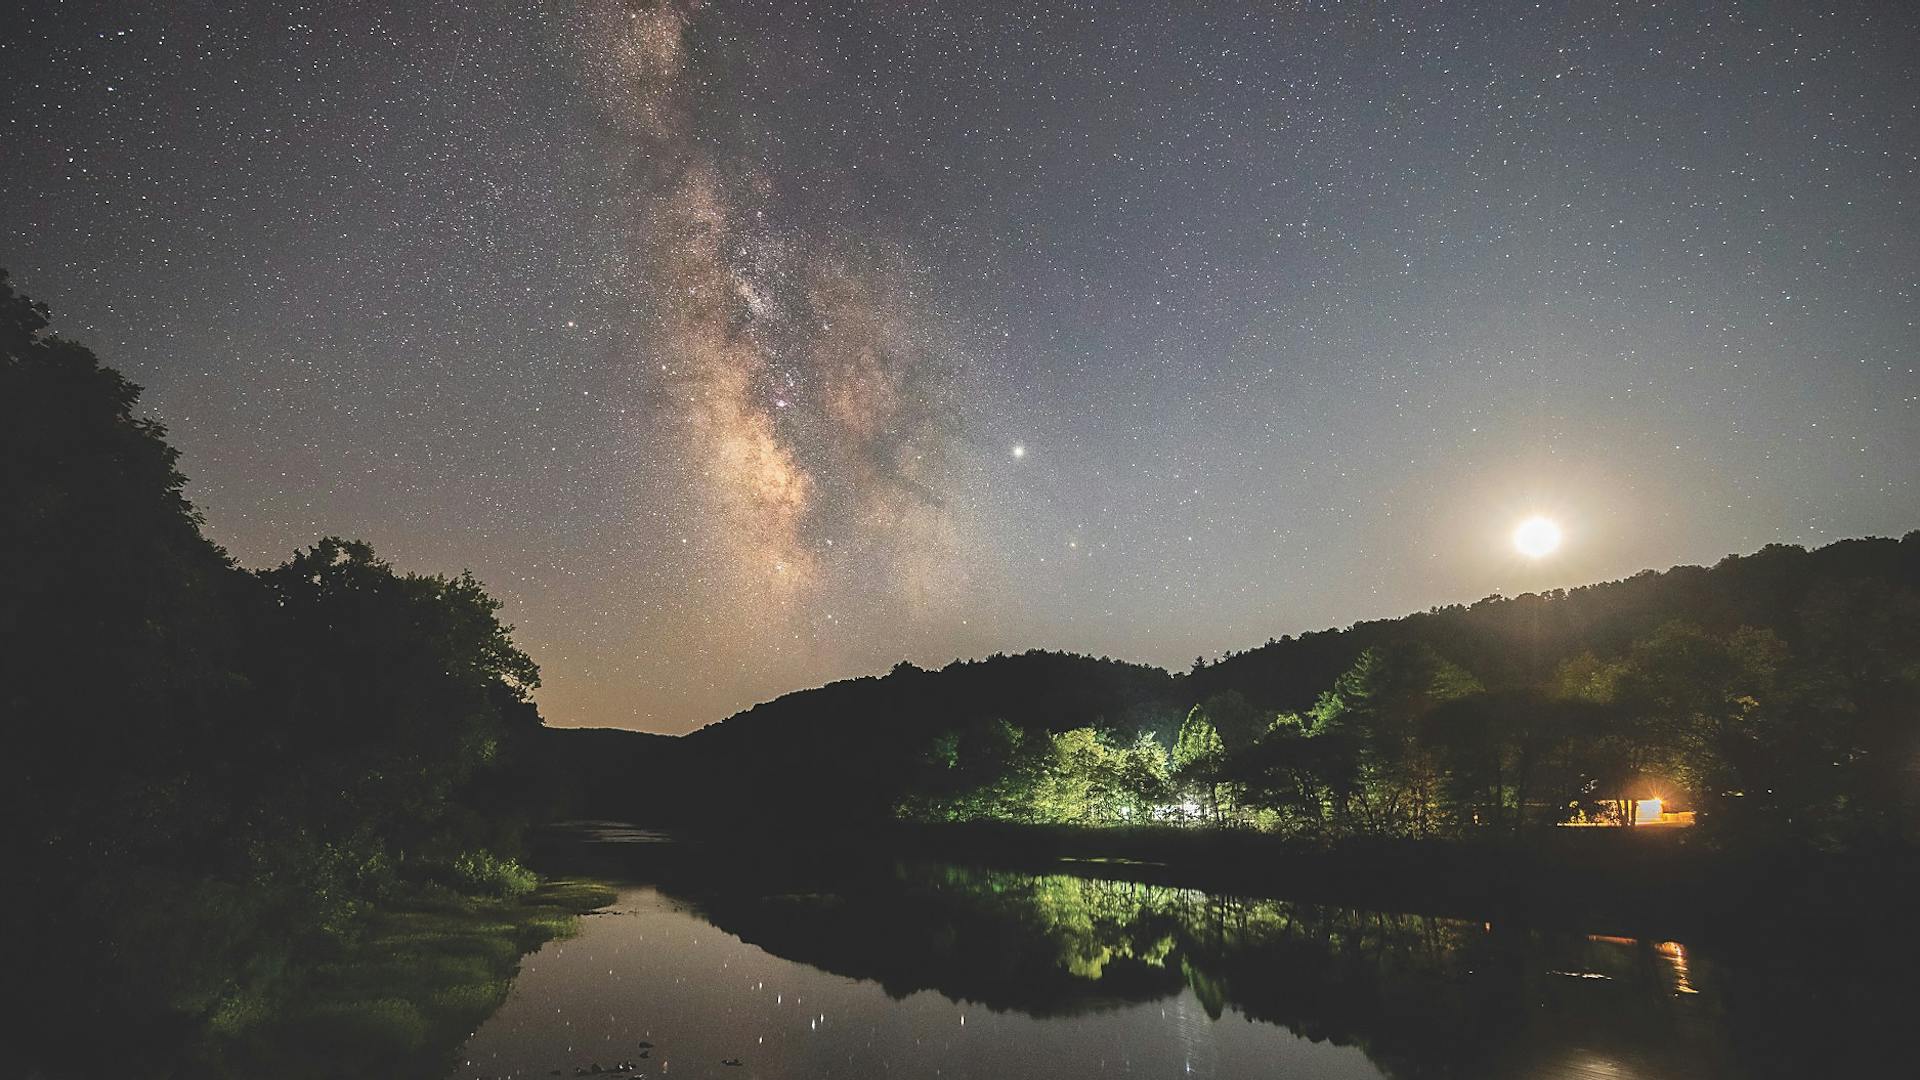 Night sky reflected in lake at Watoga State Park in Pocahontas County, West Virginia (photo by Jessie Thornton)